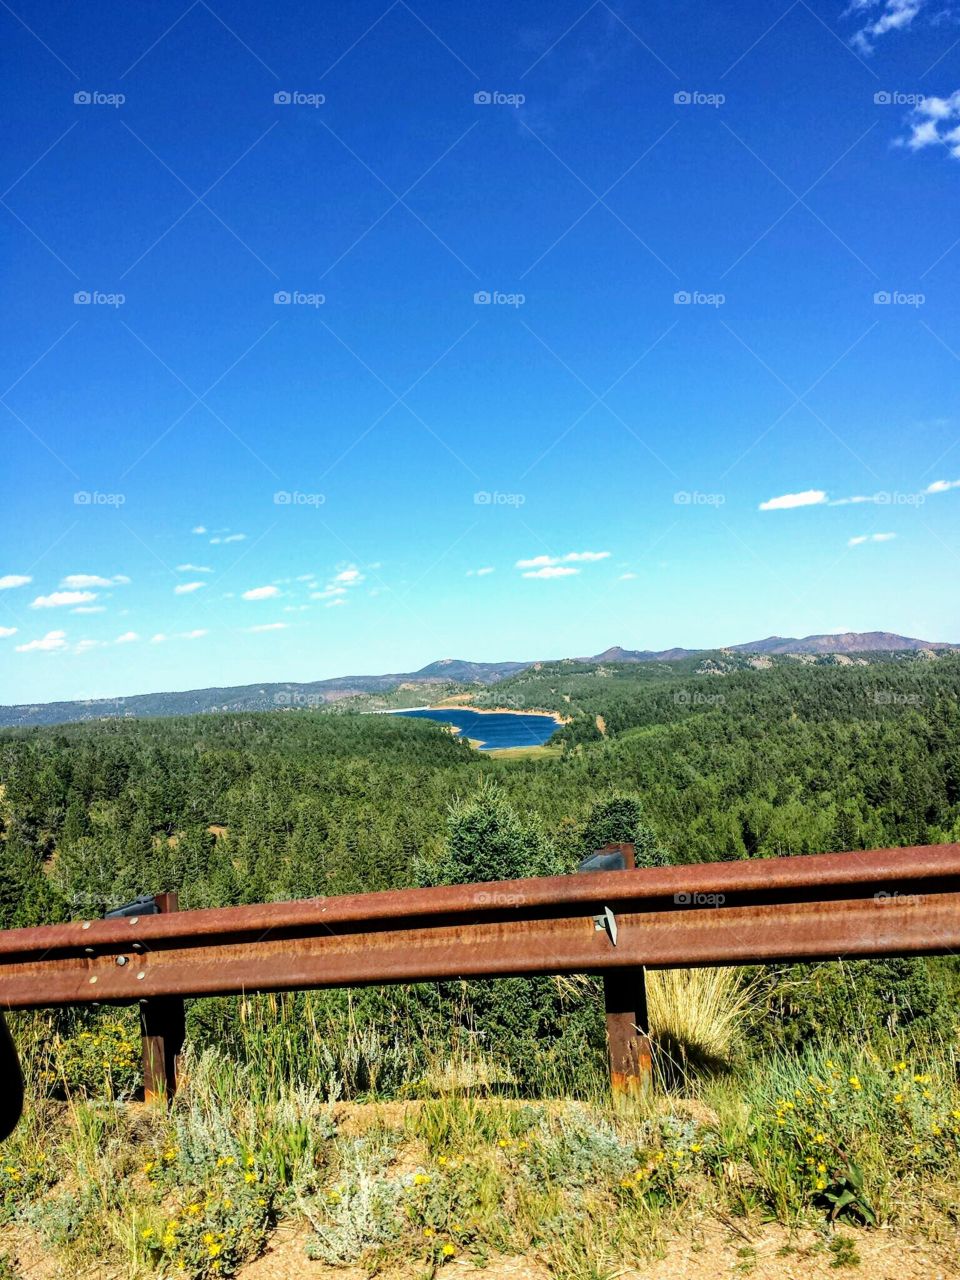 View of a lake from a higher elevation